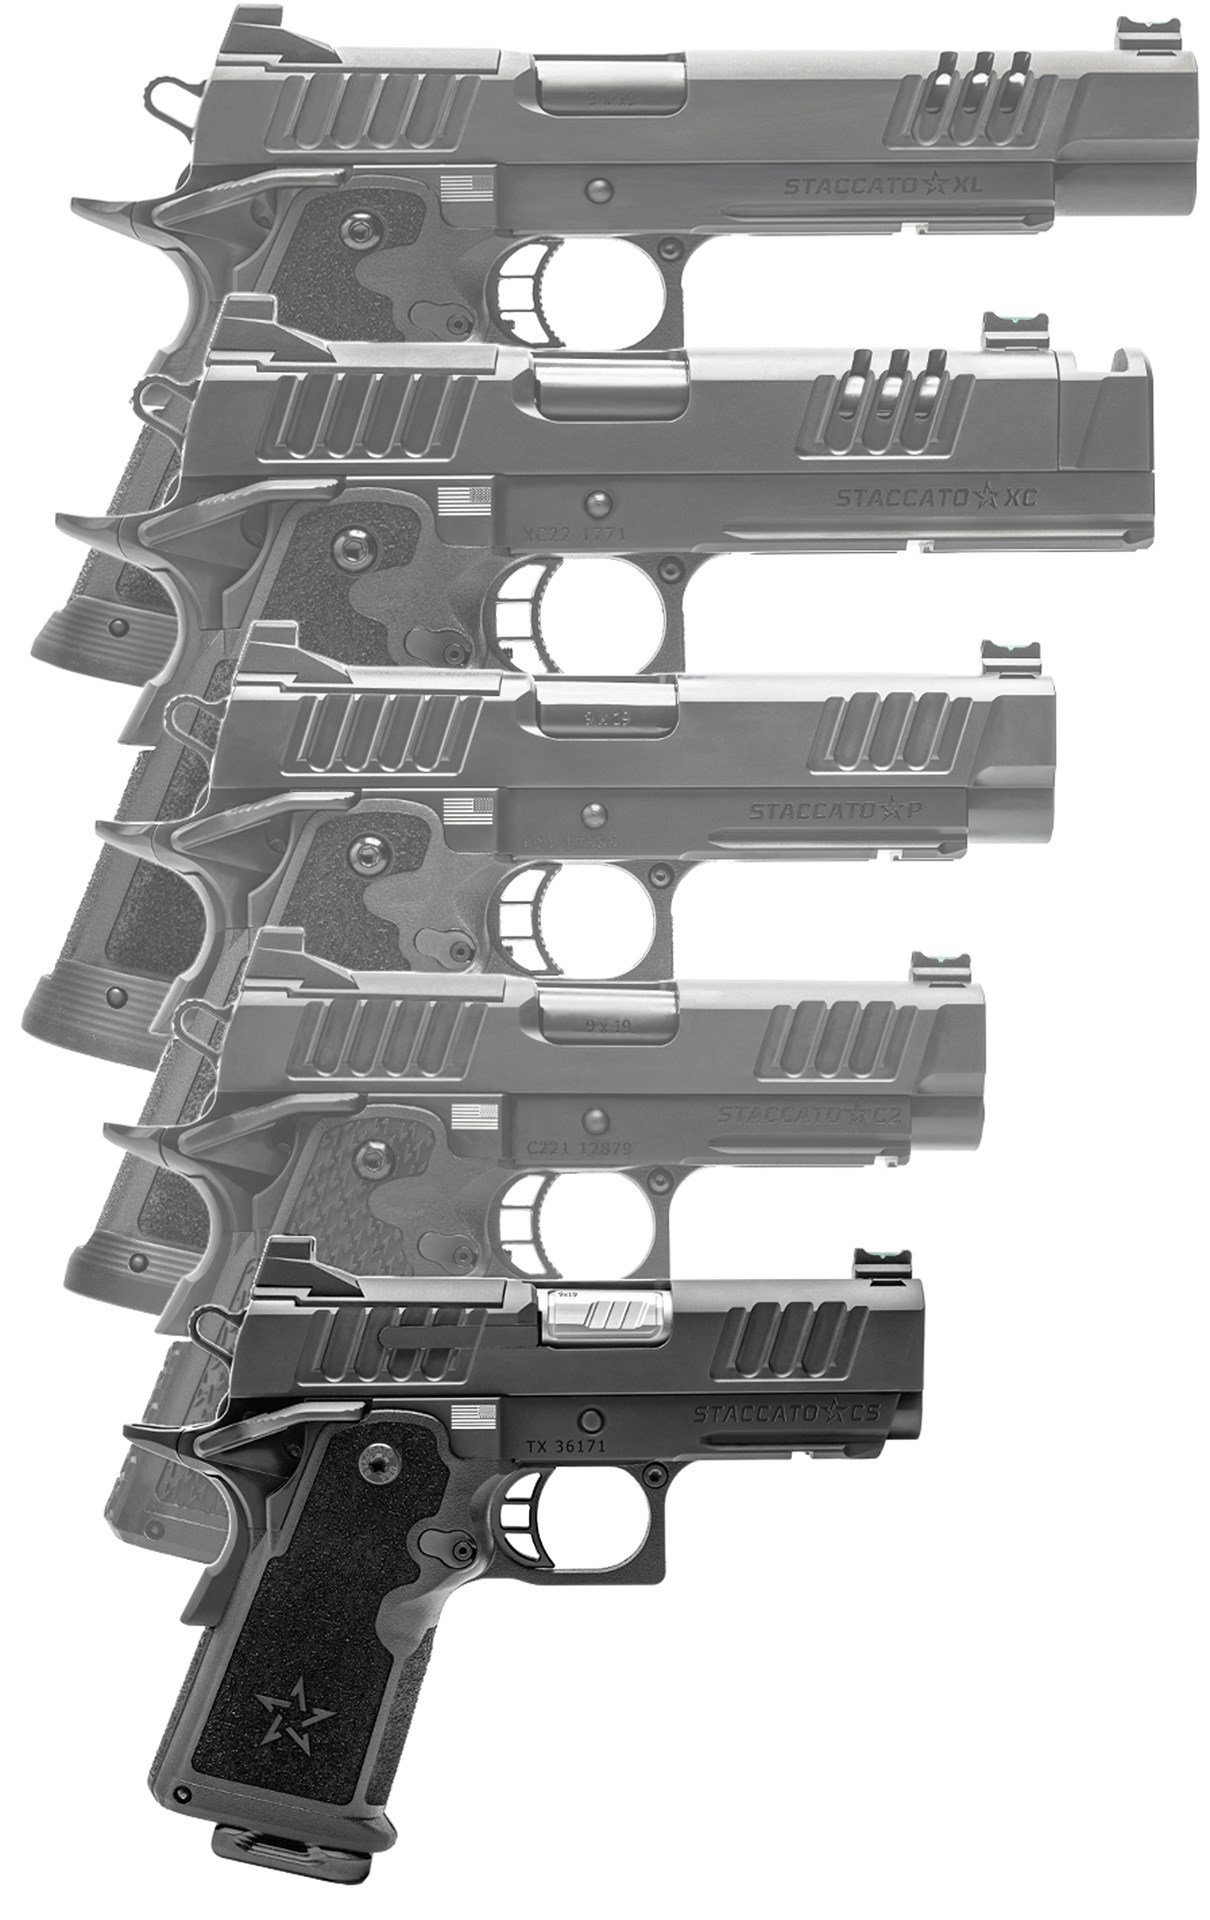 Staccato pistol stack row guns ghosted rear images accentuating STACCATO CS model at bottom 9 mm pistols hybrid m1911 polymer grip black guns